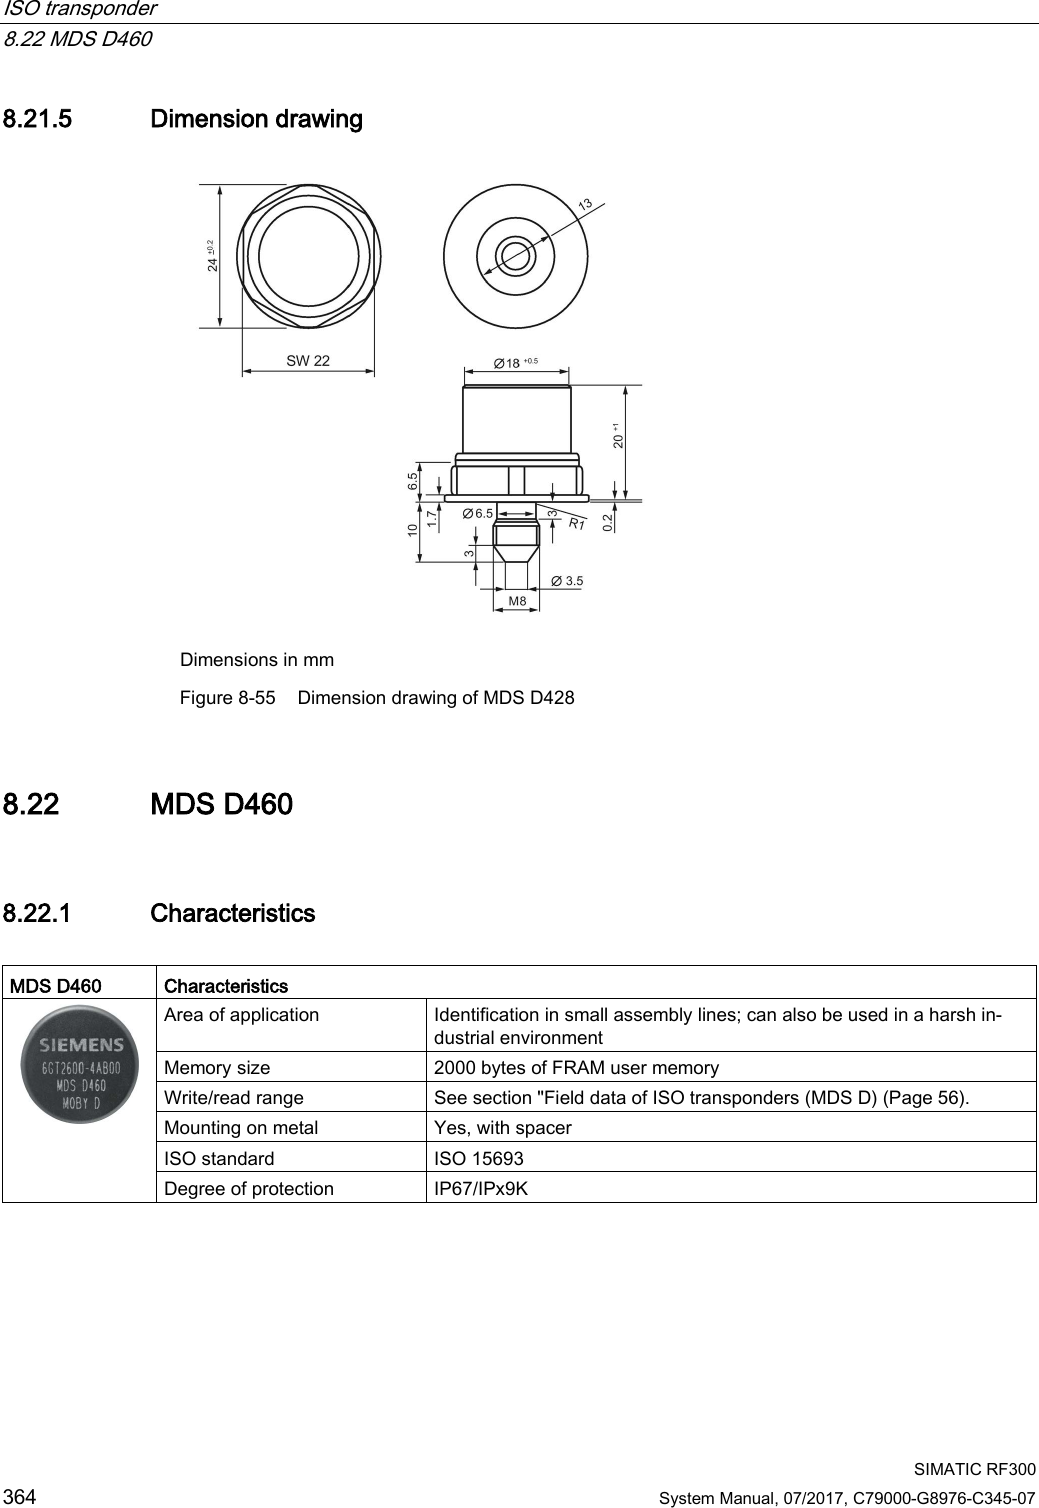 ISO transponder   8.22 MDS D460  SIMATIC RF300 364 System Manual, 07/2017, C79000-G8976-C345-07 8.21.5 Dimension drawing  Dimensions in mm Figure 8-55 Dimension drawing of MDS D428 8.22 MDS D460 8.22.1 Characteristics  MDS D460 Characteristics  Area of application Identification in small assembly lines; can also be used in a harsh in-dustrial environment Memory size 2000 bytes of FRAM user memory Write/read range See section &quot;Field data of ISO transponders (MDS D) (Page 56). Mounting on metal Yes, with spacer ISO standard ISO 15693 Degree of protection IP67/IPx9K   